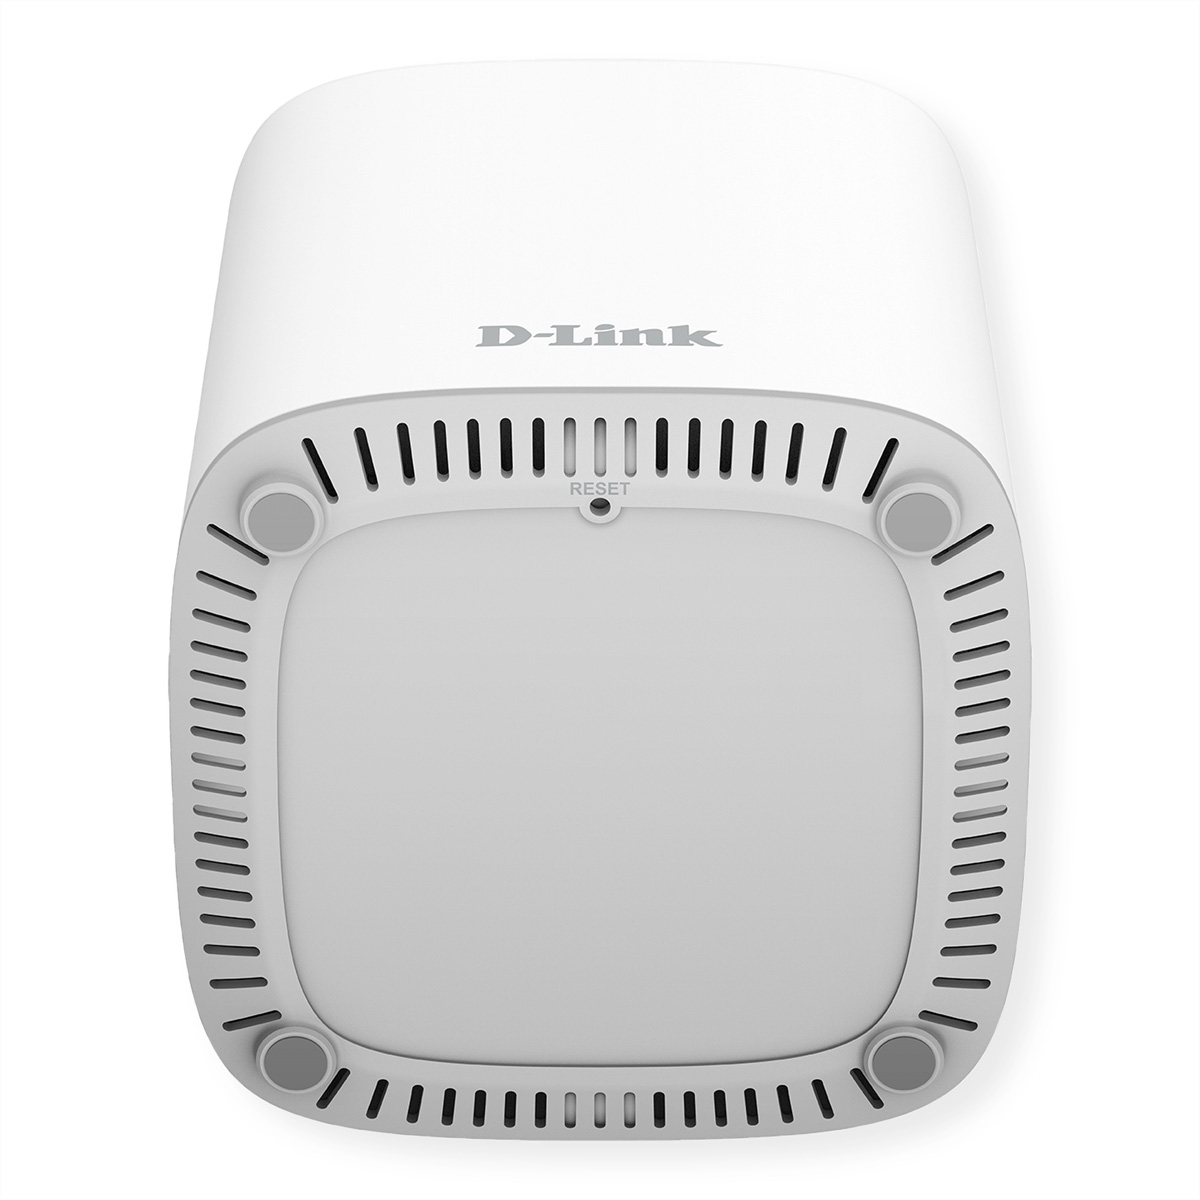 Band COVR‑X1862 D-LINK Mesh System, 6 Home Whole Set AX1800 WLAN Wi‑Fi Dual 1,8 Points Access Gbit/s 2er